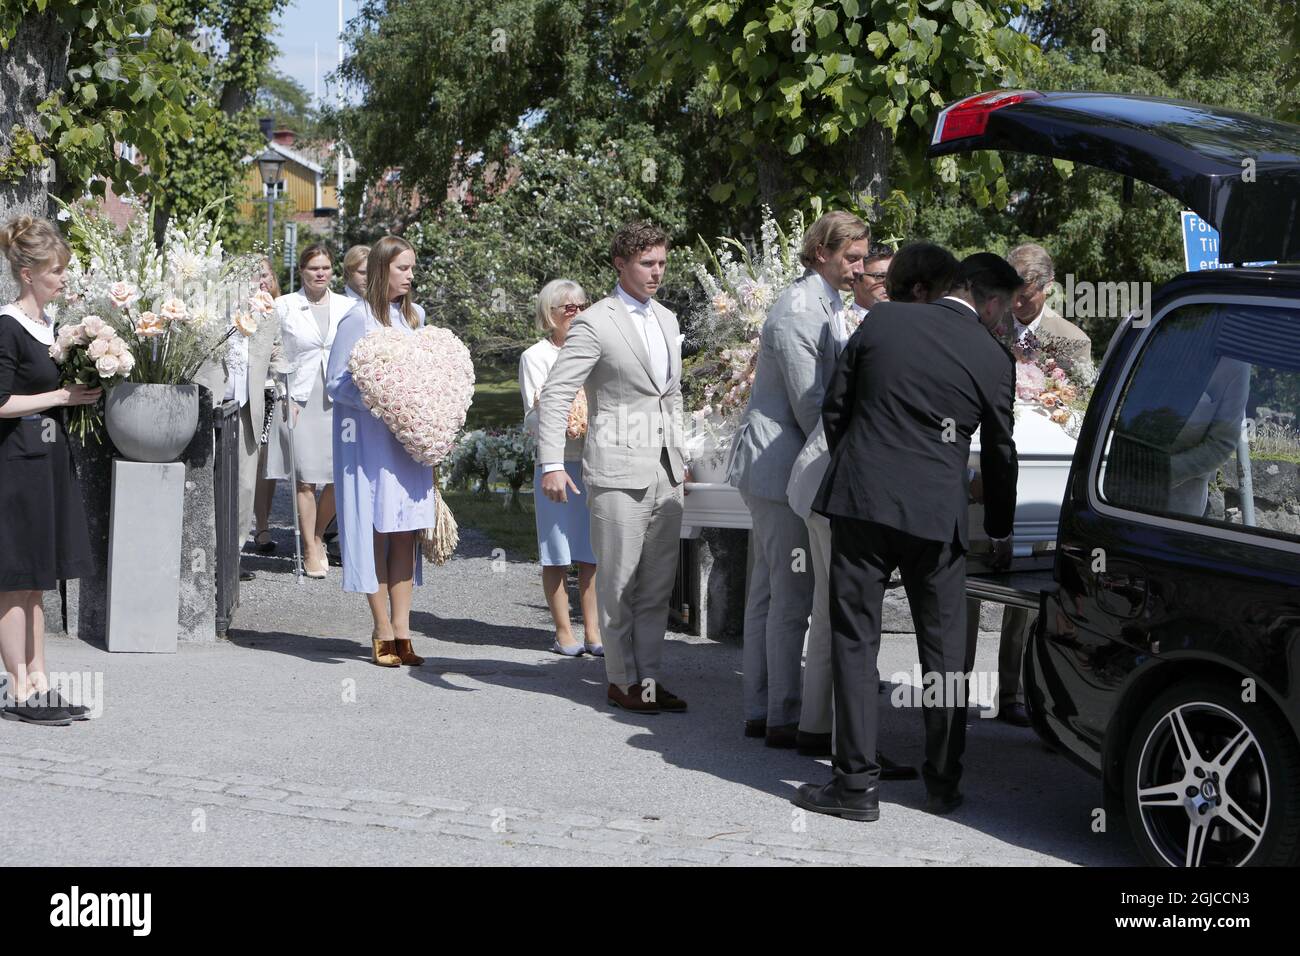 Funeral of Anki Wallenberg in Dalaro church, Stockholm, Sweden 19 July 2019 Anki Wallenberg died in a sailing accident on the lake Geneva. She resided in London and was a close friend to the Swedish Royal Family. (c) Patrik Ã–sterberg / TT / kod 2857  Stock Photo